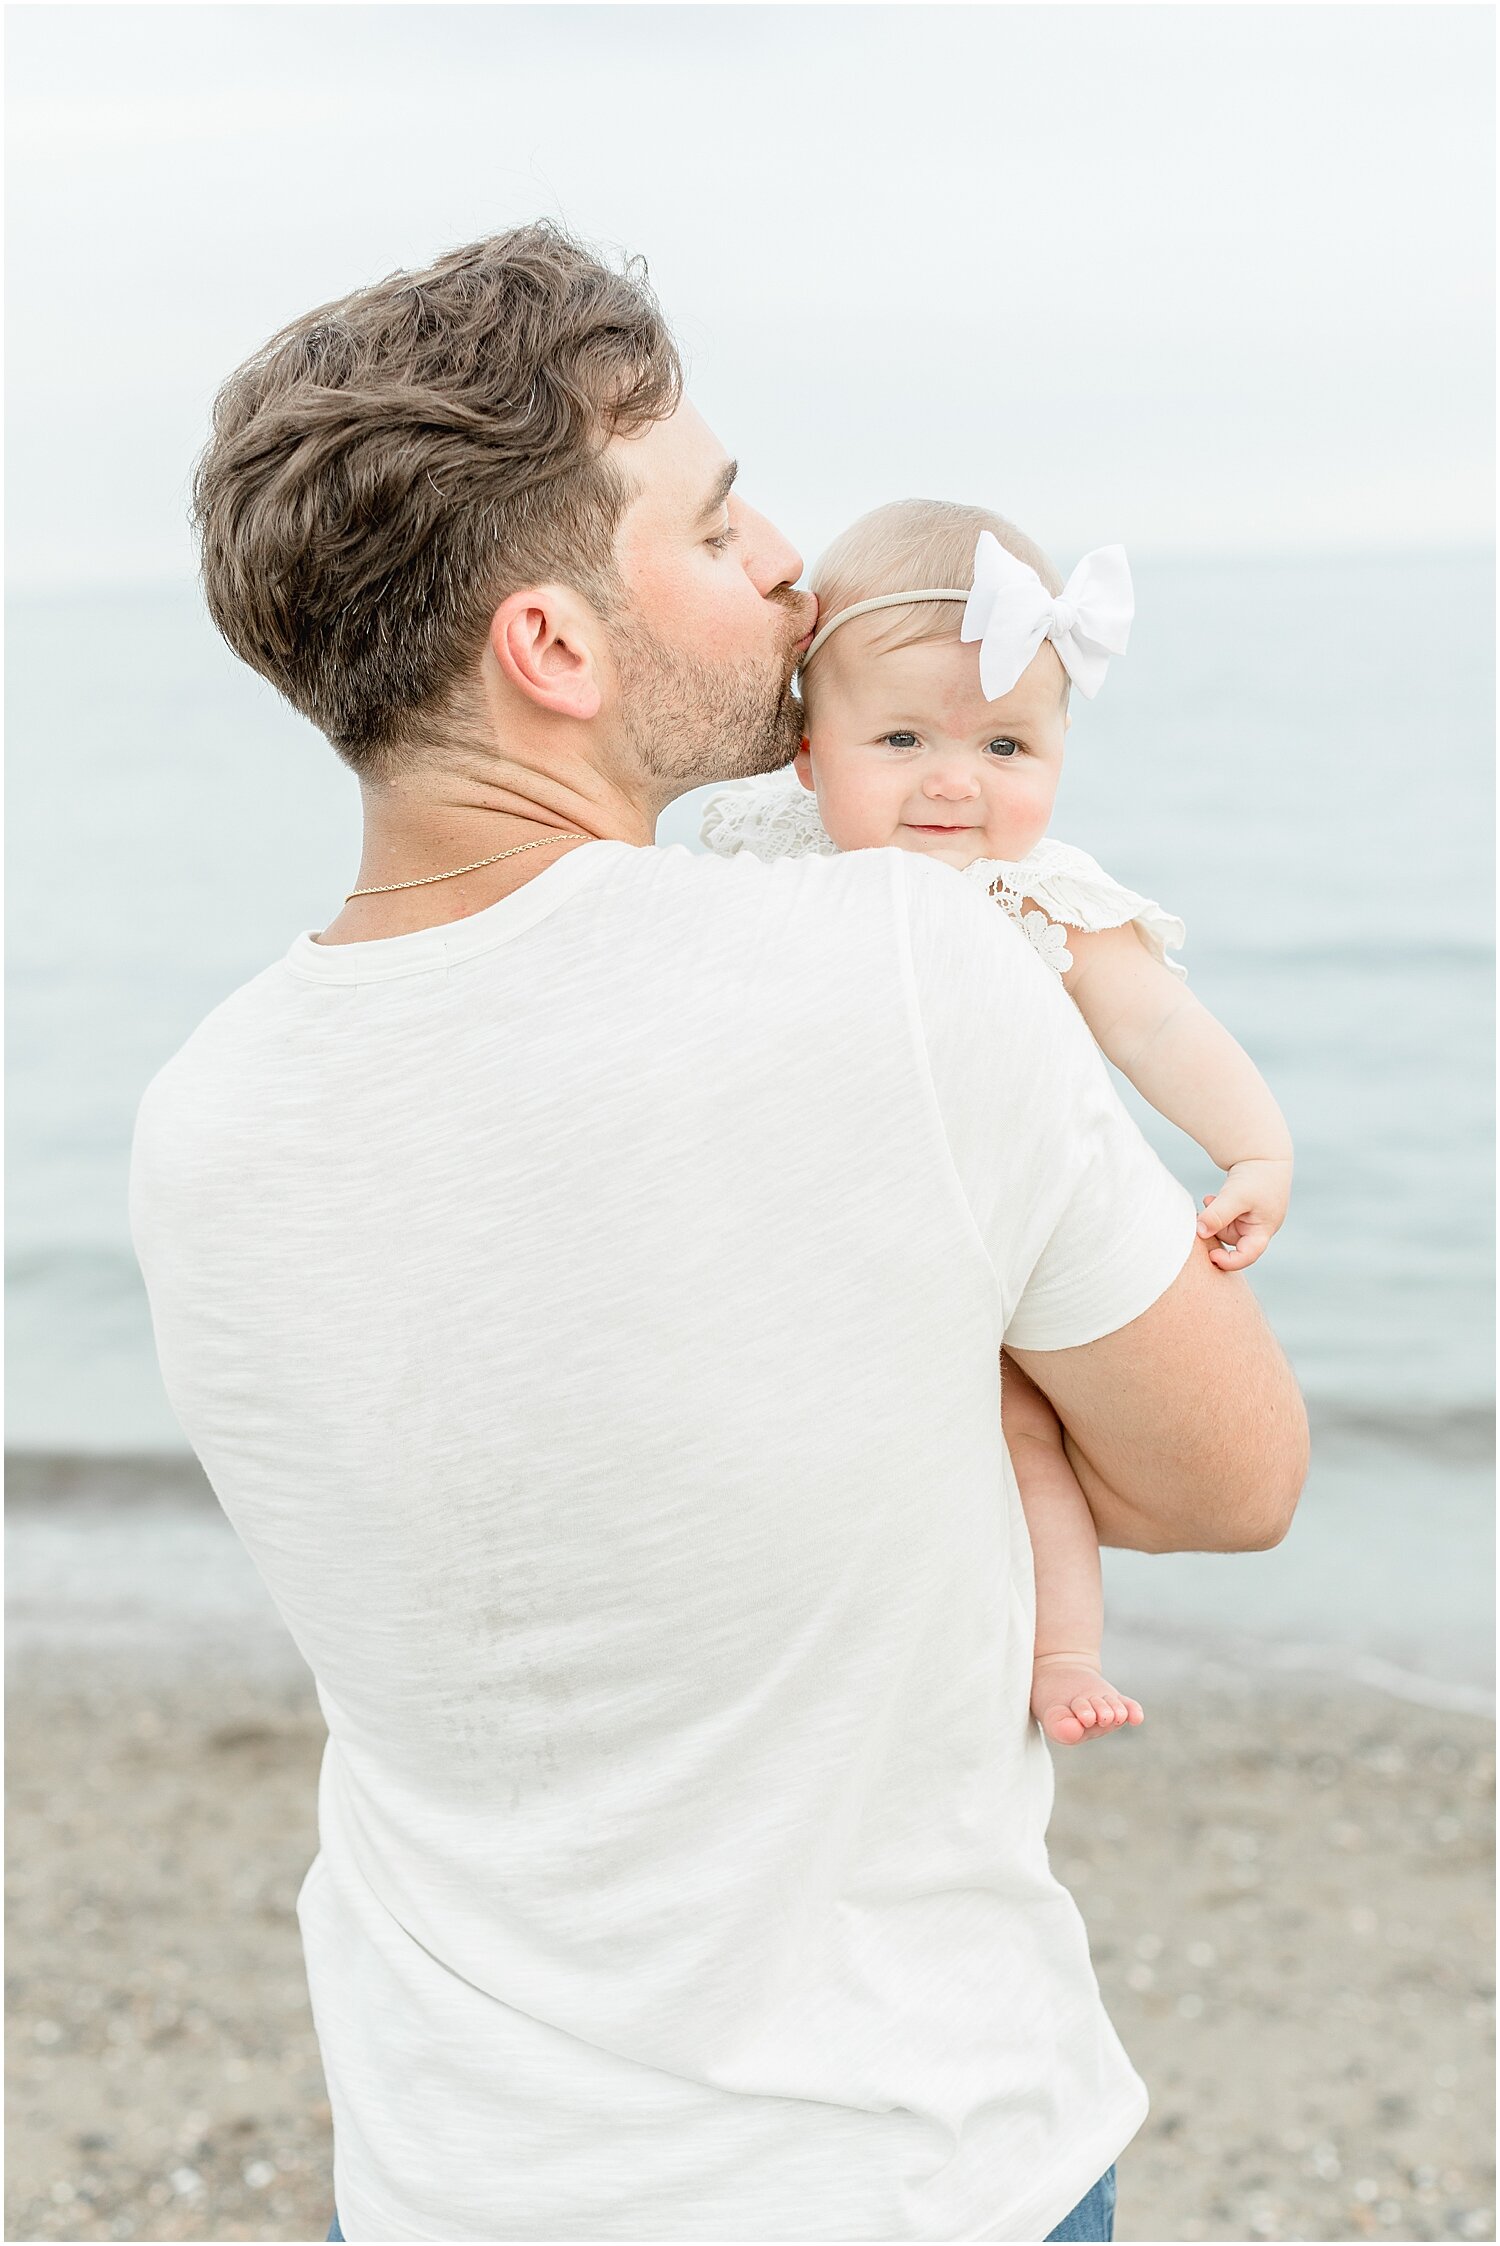 Dad with baby girl at 6 month milestone session on the beach in Westport, CT. Photos by Kristin Wood Photography.